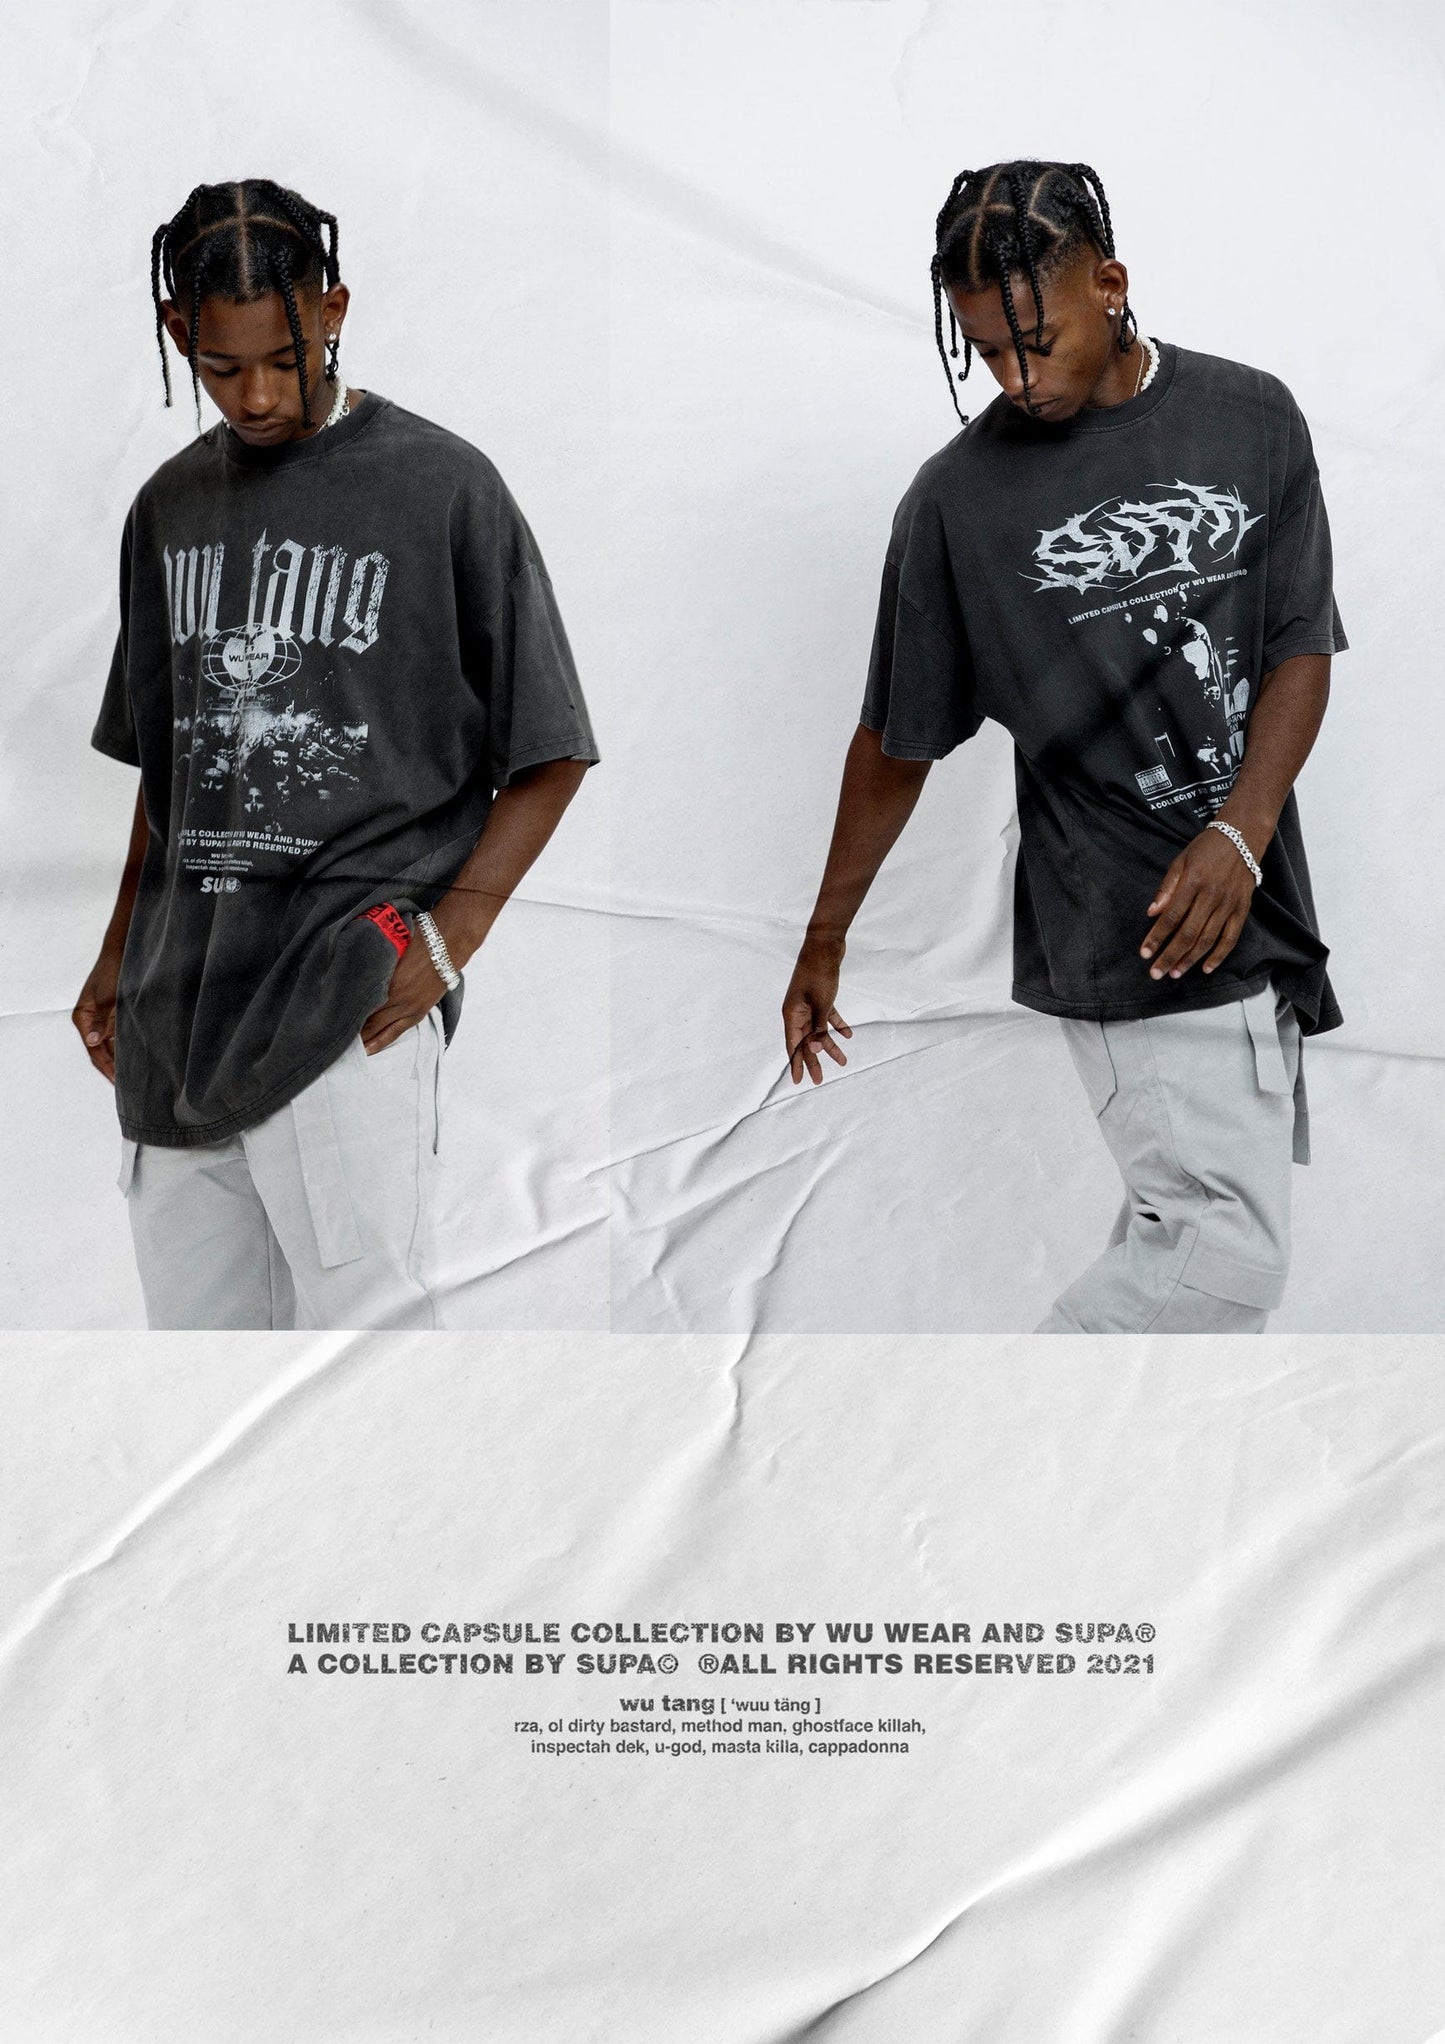 WU TANG / SUPA® Chinese Tour Collection